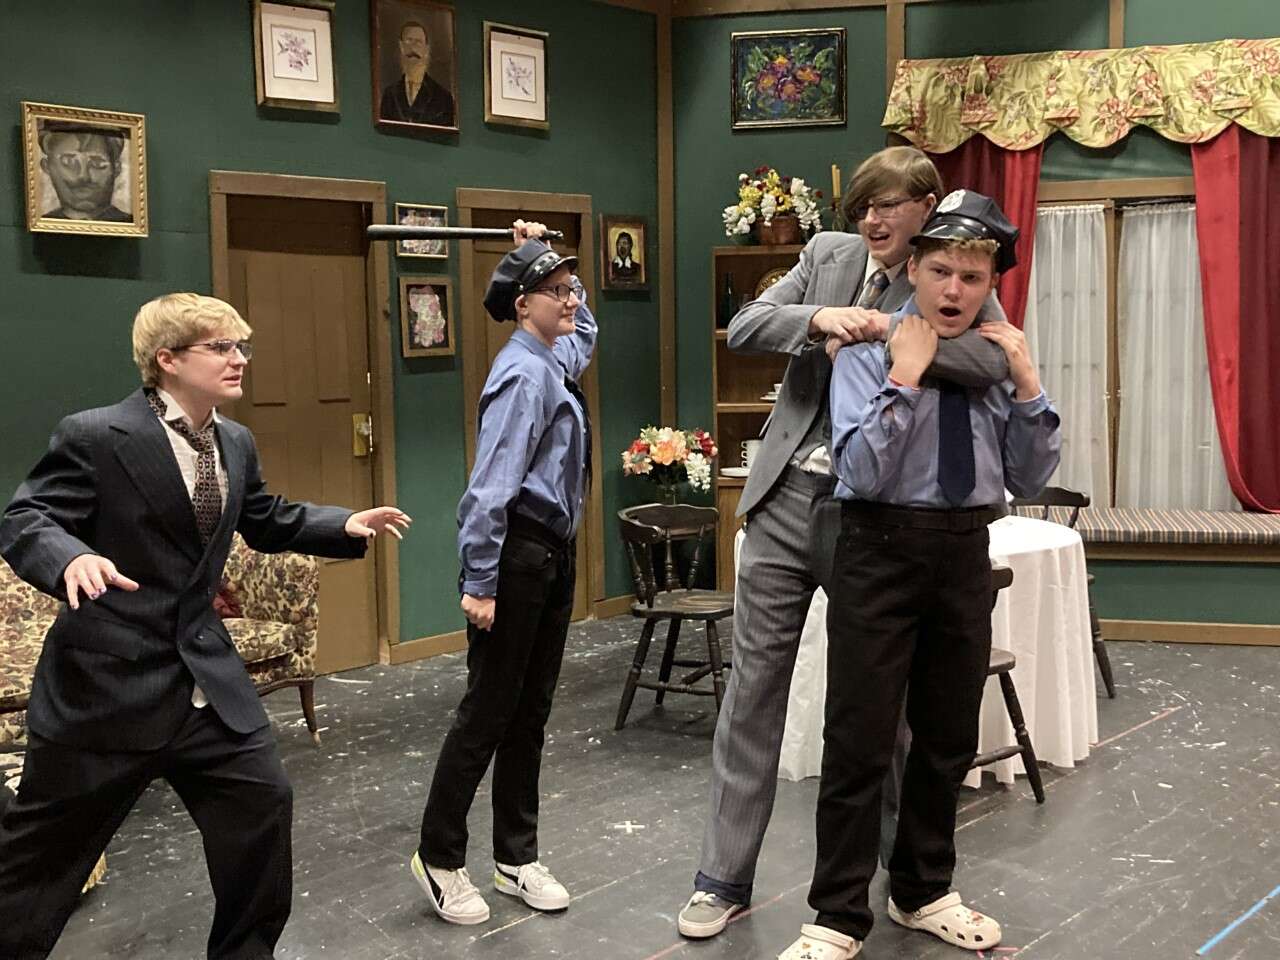 Arsenic and Old Lace' performed with flair and style – Daily Local